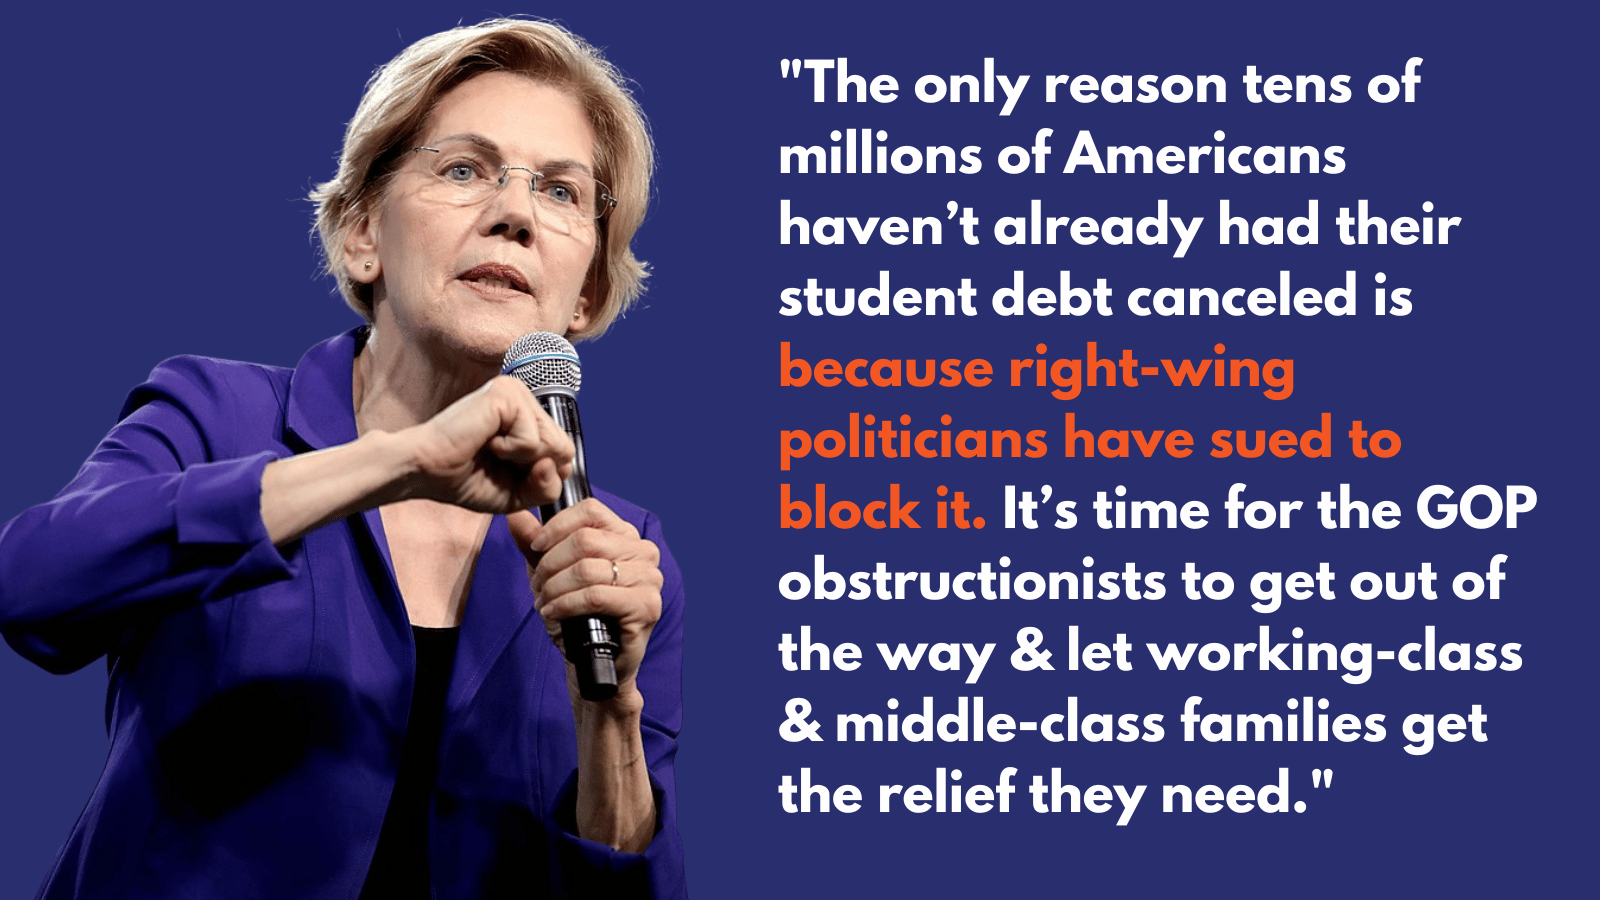 Elizabeth Warren: The only reason tens of millions of Americans haven’t already had their student debt canceled is because right-wing politicians have sued to block it. It’s time for the GOP obstructionists to get out of the way & let working-class & middle-class families get the relief they need.